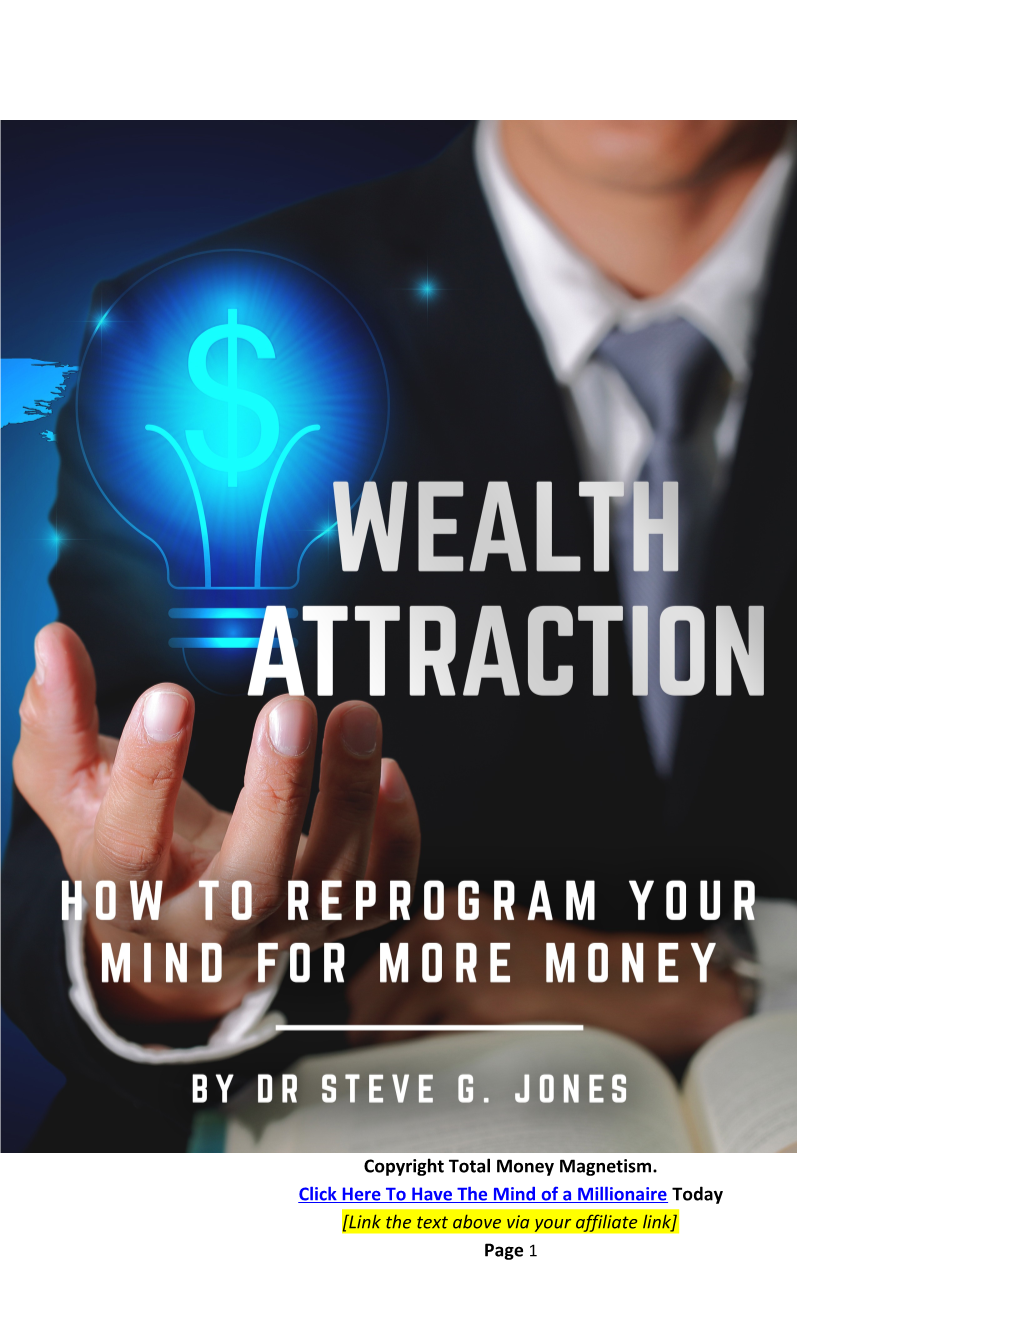 Wealth Attraction - How to Reprogram Your Mind for More Money